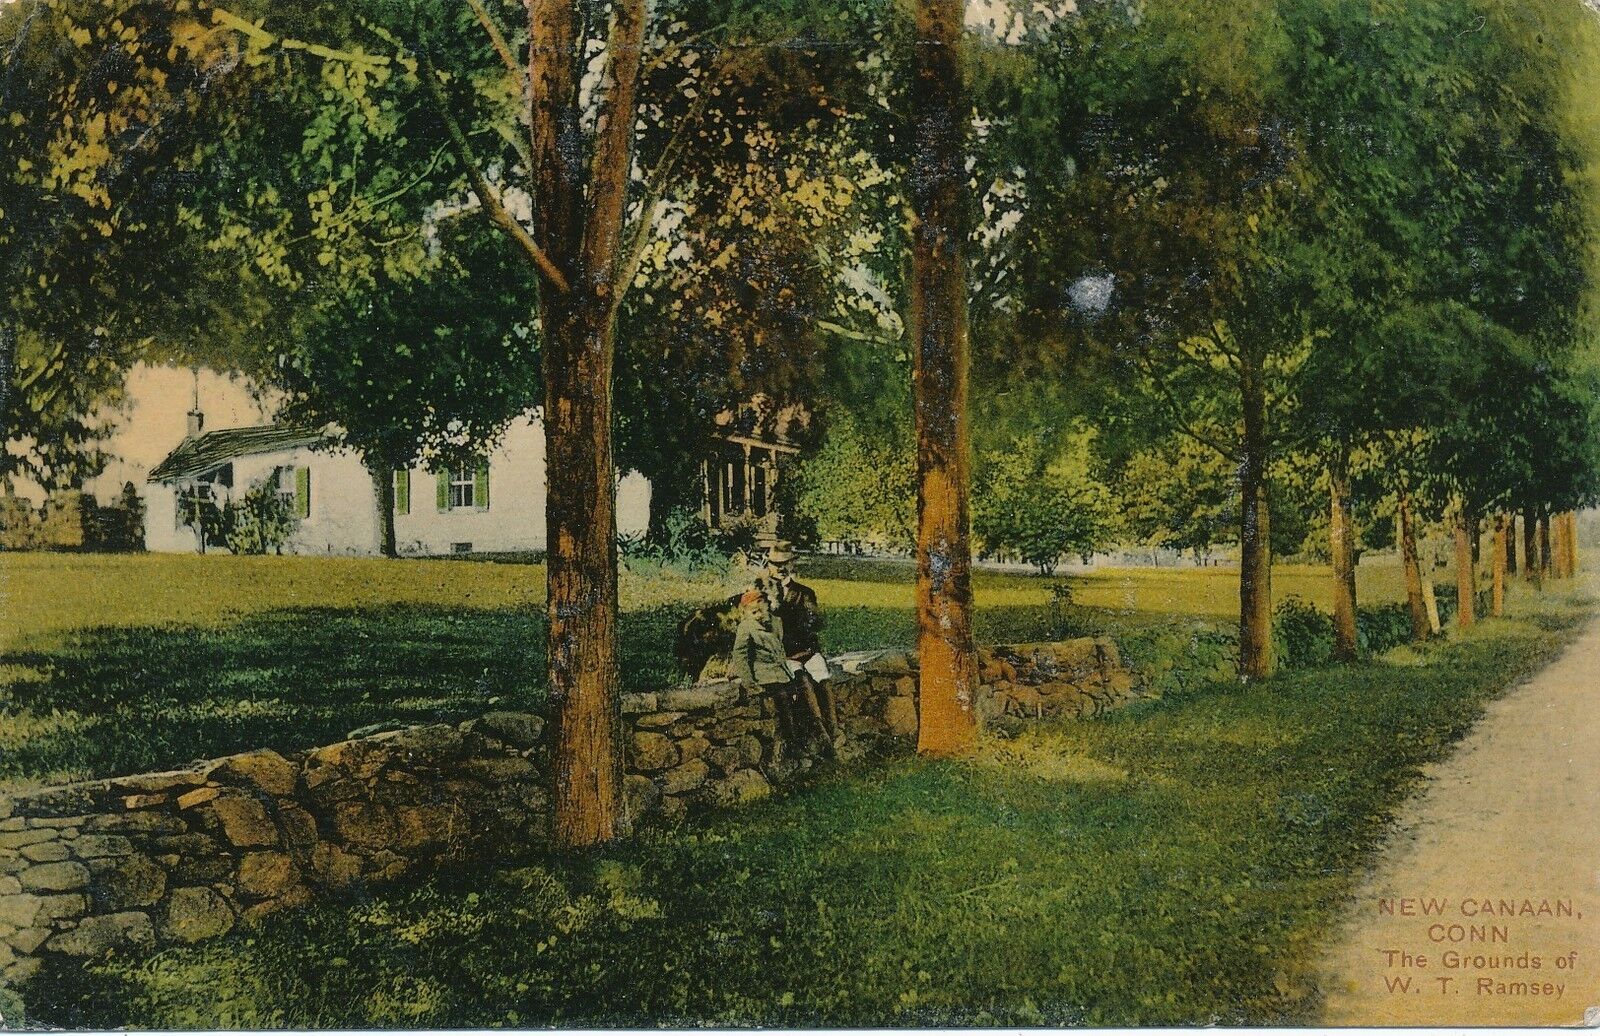 NEW CANAAN CT – W. T. Ramsey Grounds - 1908